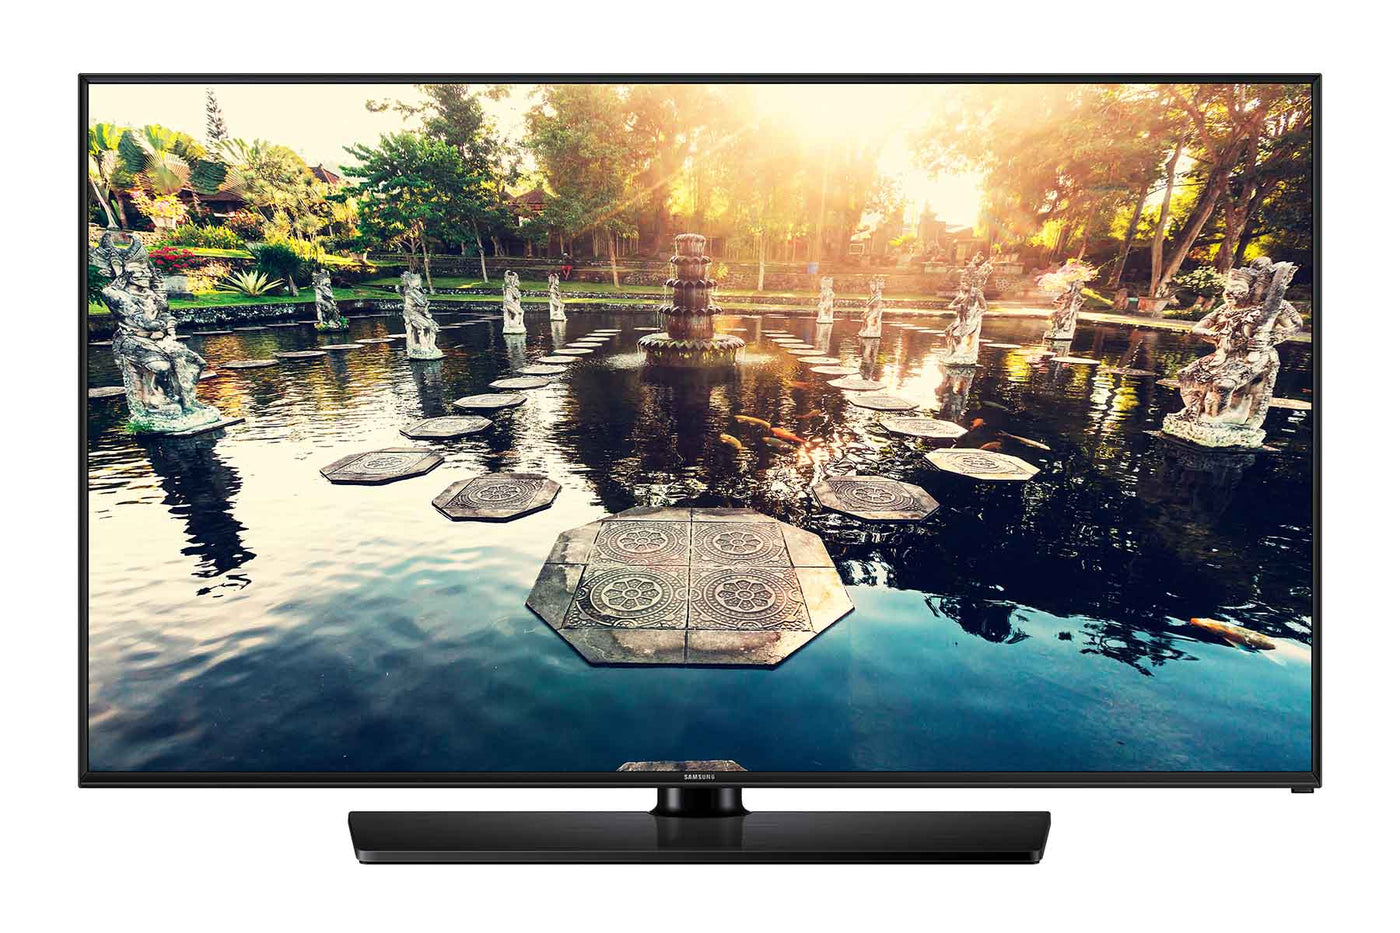 Samsung HG22NE690ZF 22" SMART Direct-Lit LED with Pro:Idiom and 2 Year Warranty